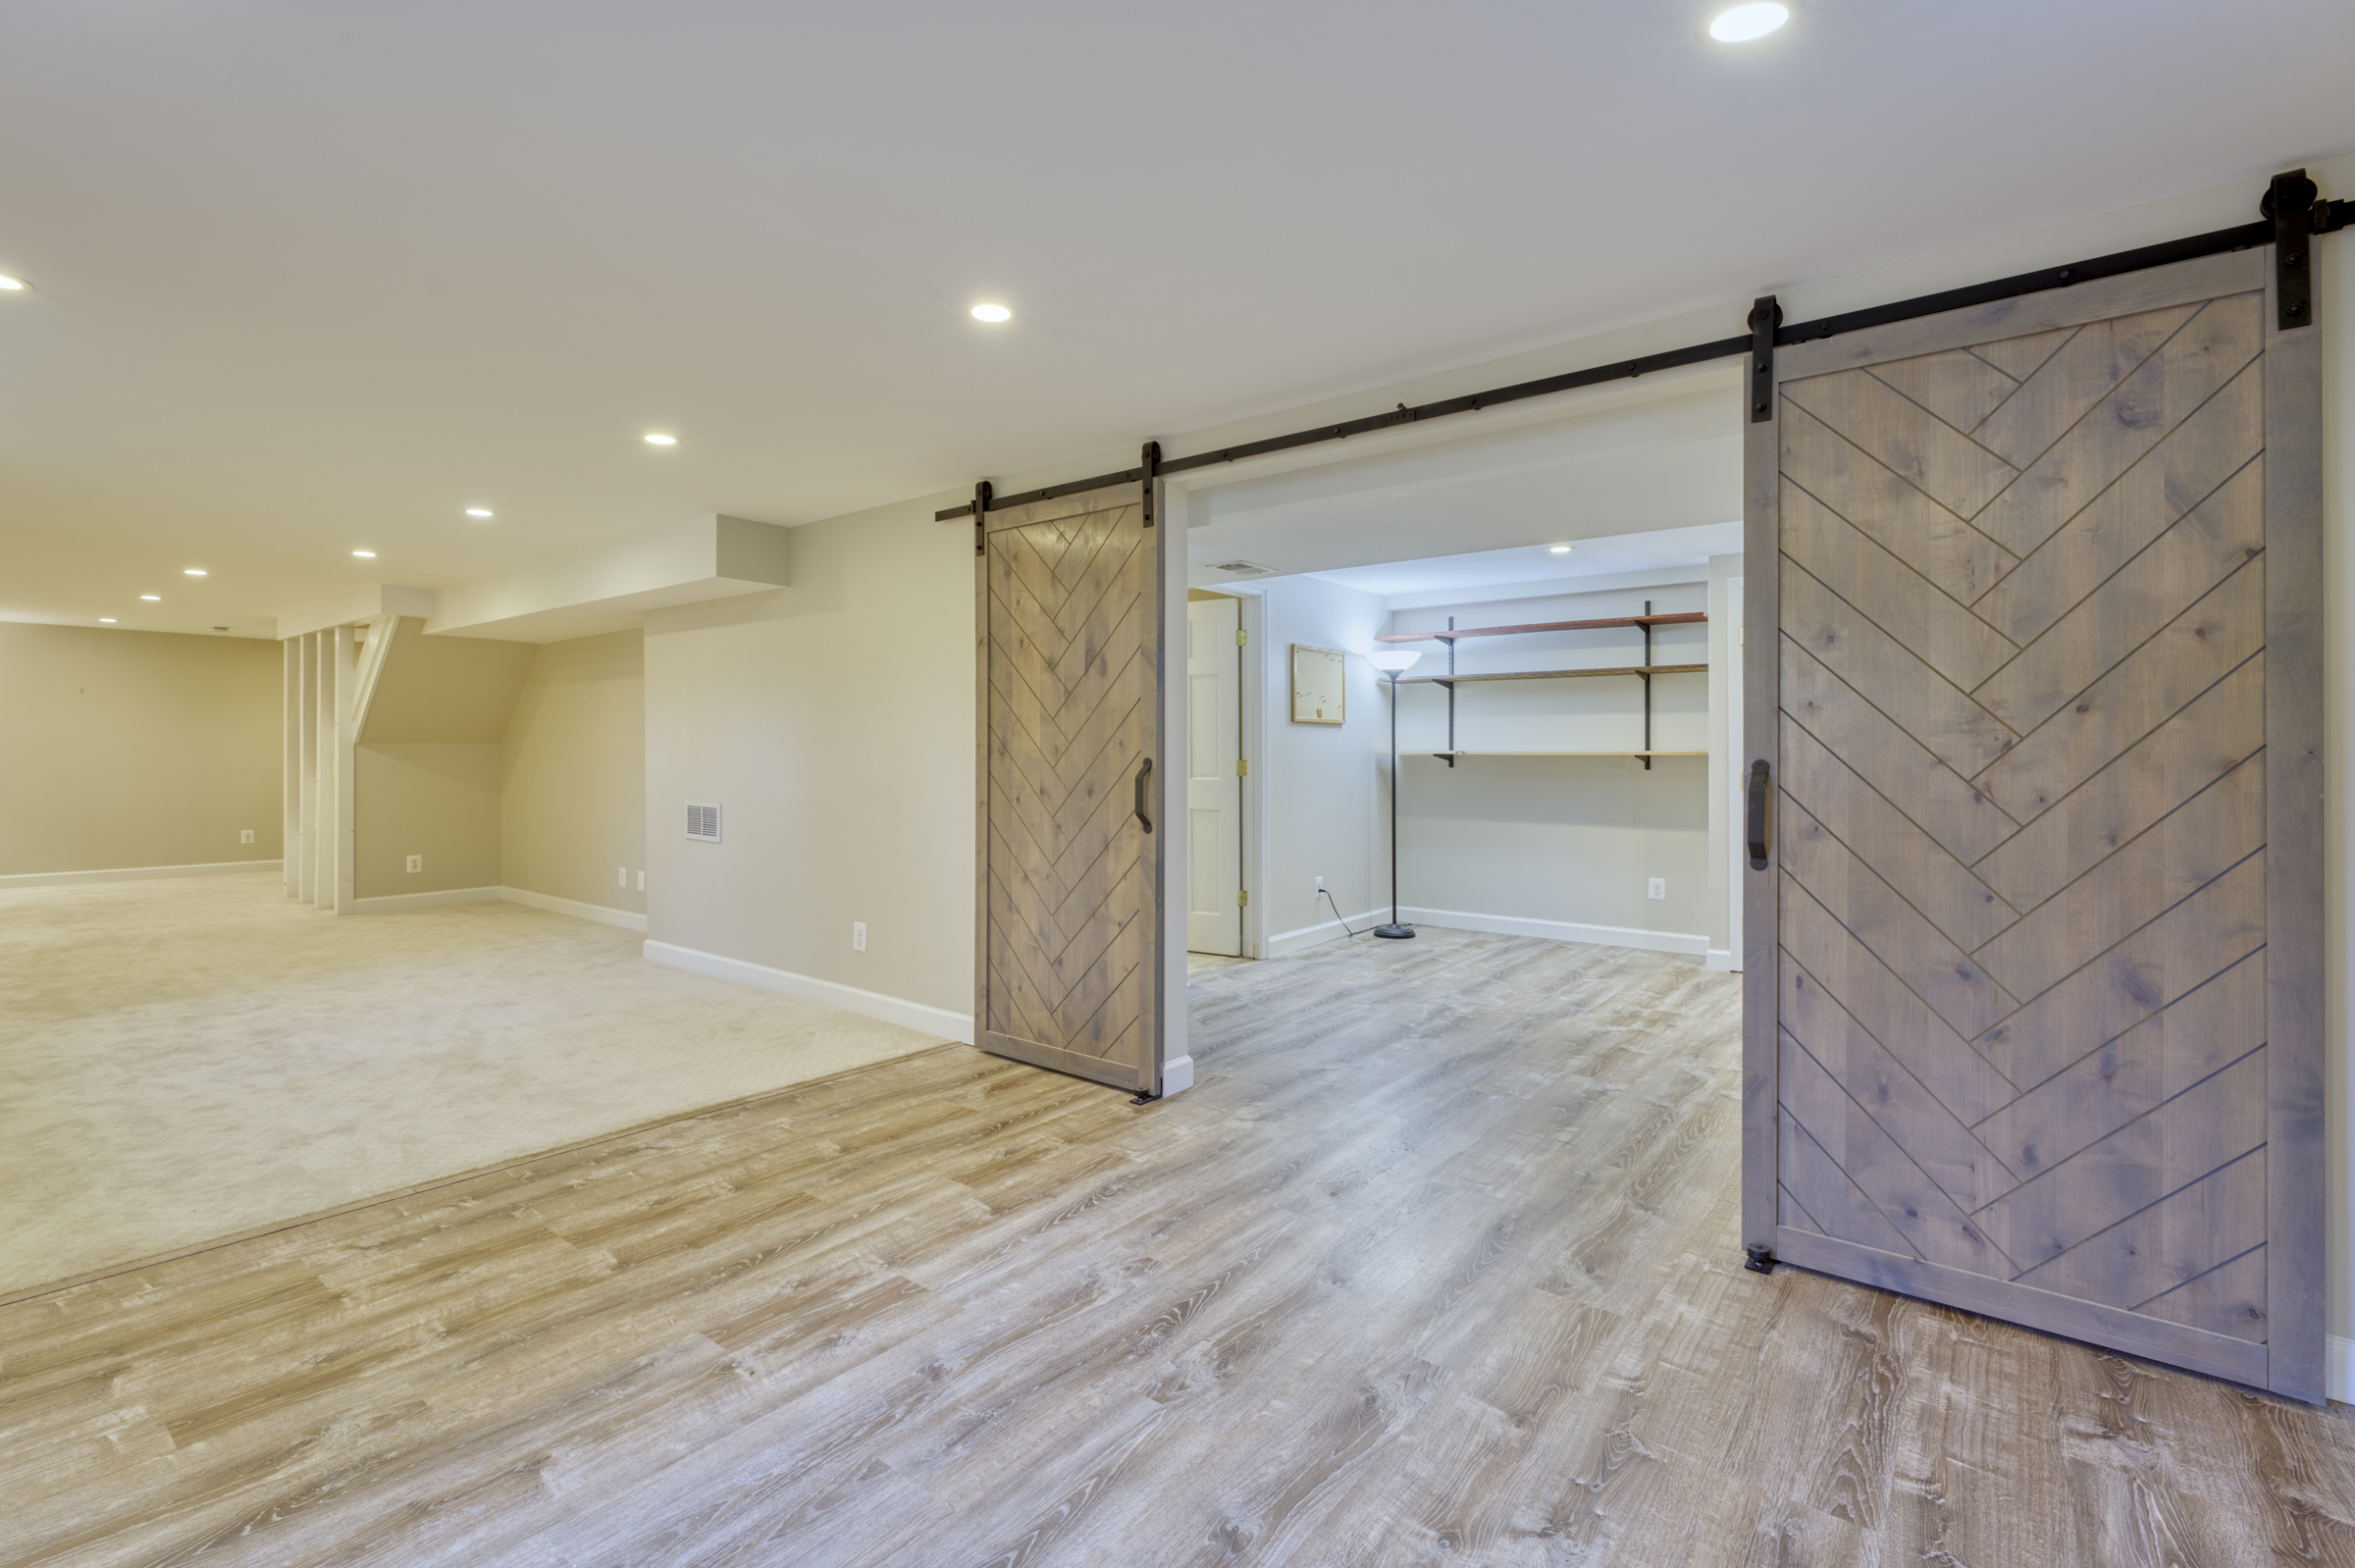 Professional interior photo of 2624 Depaul Dr in Vienna, VA - showing the main area in the fully finished basement with beige carpeting and looking through barn doors to the game room